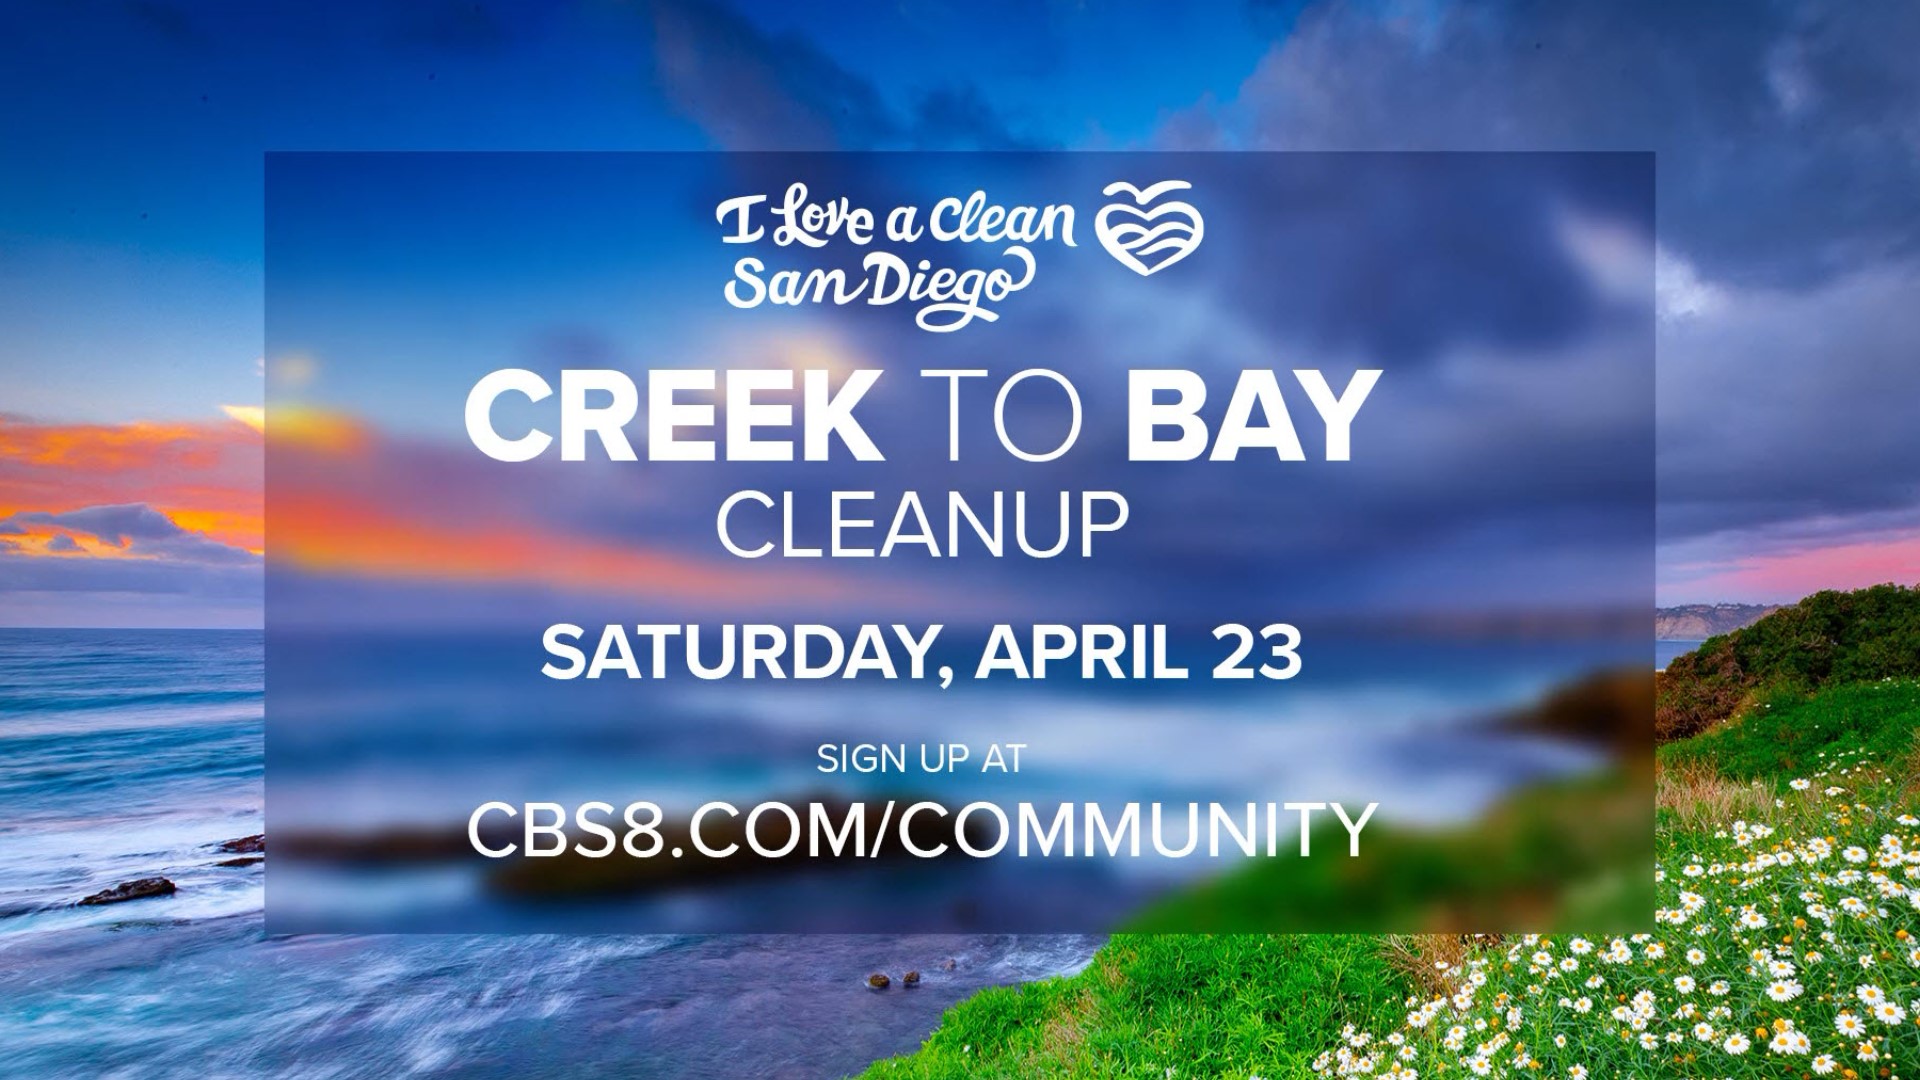 Gather your friends and family and head out to nearly 75 designated sites in San Diego, or just help by cleaning up in your neighborhood.